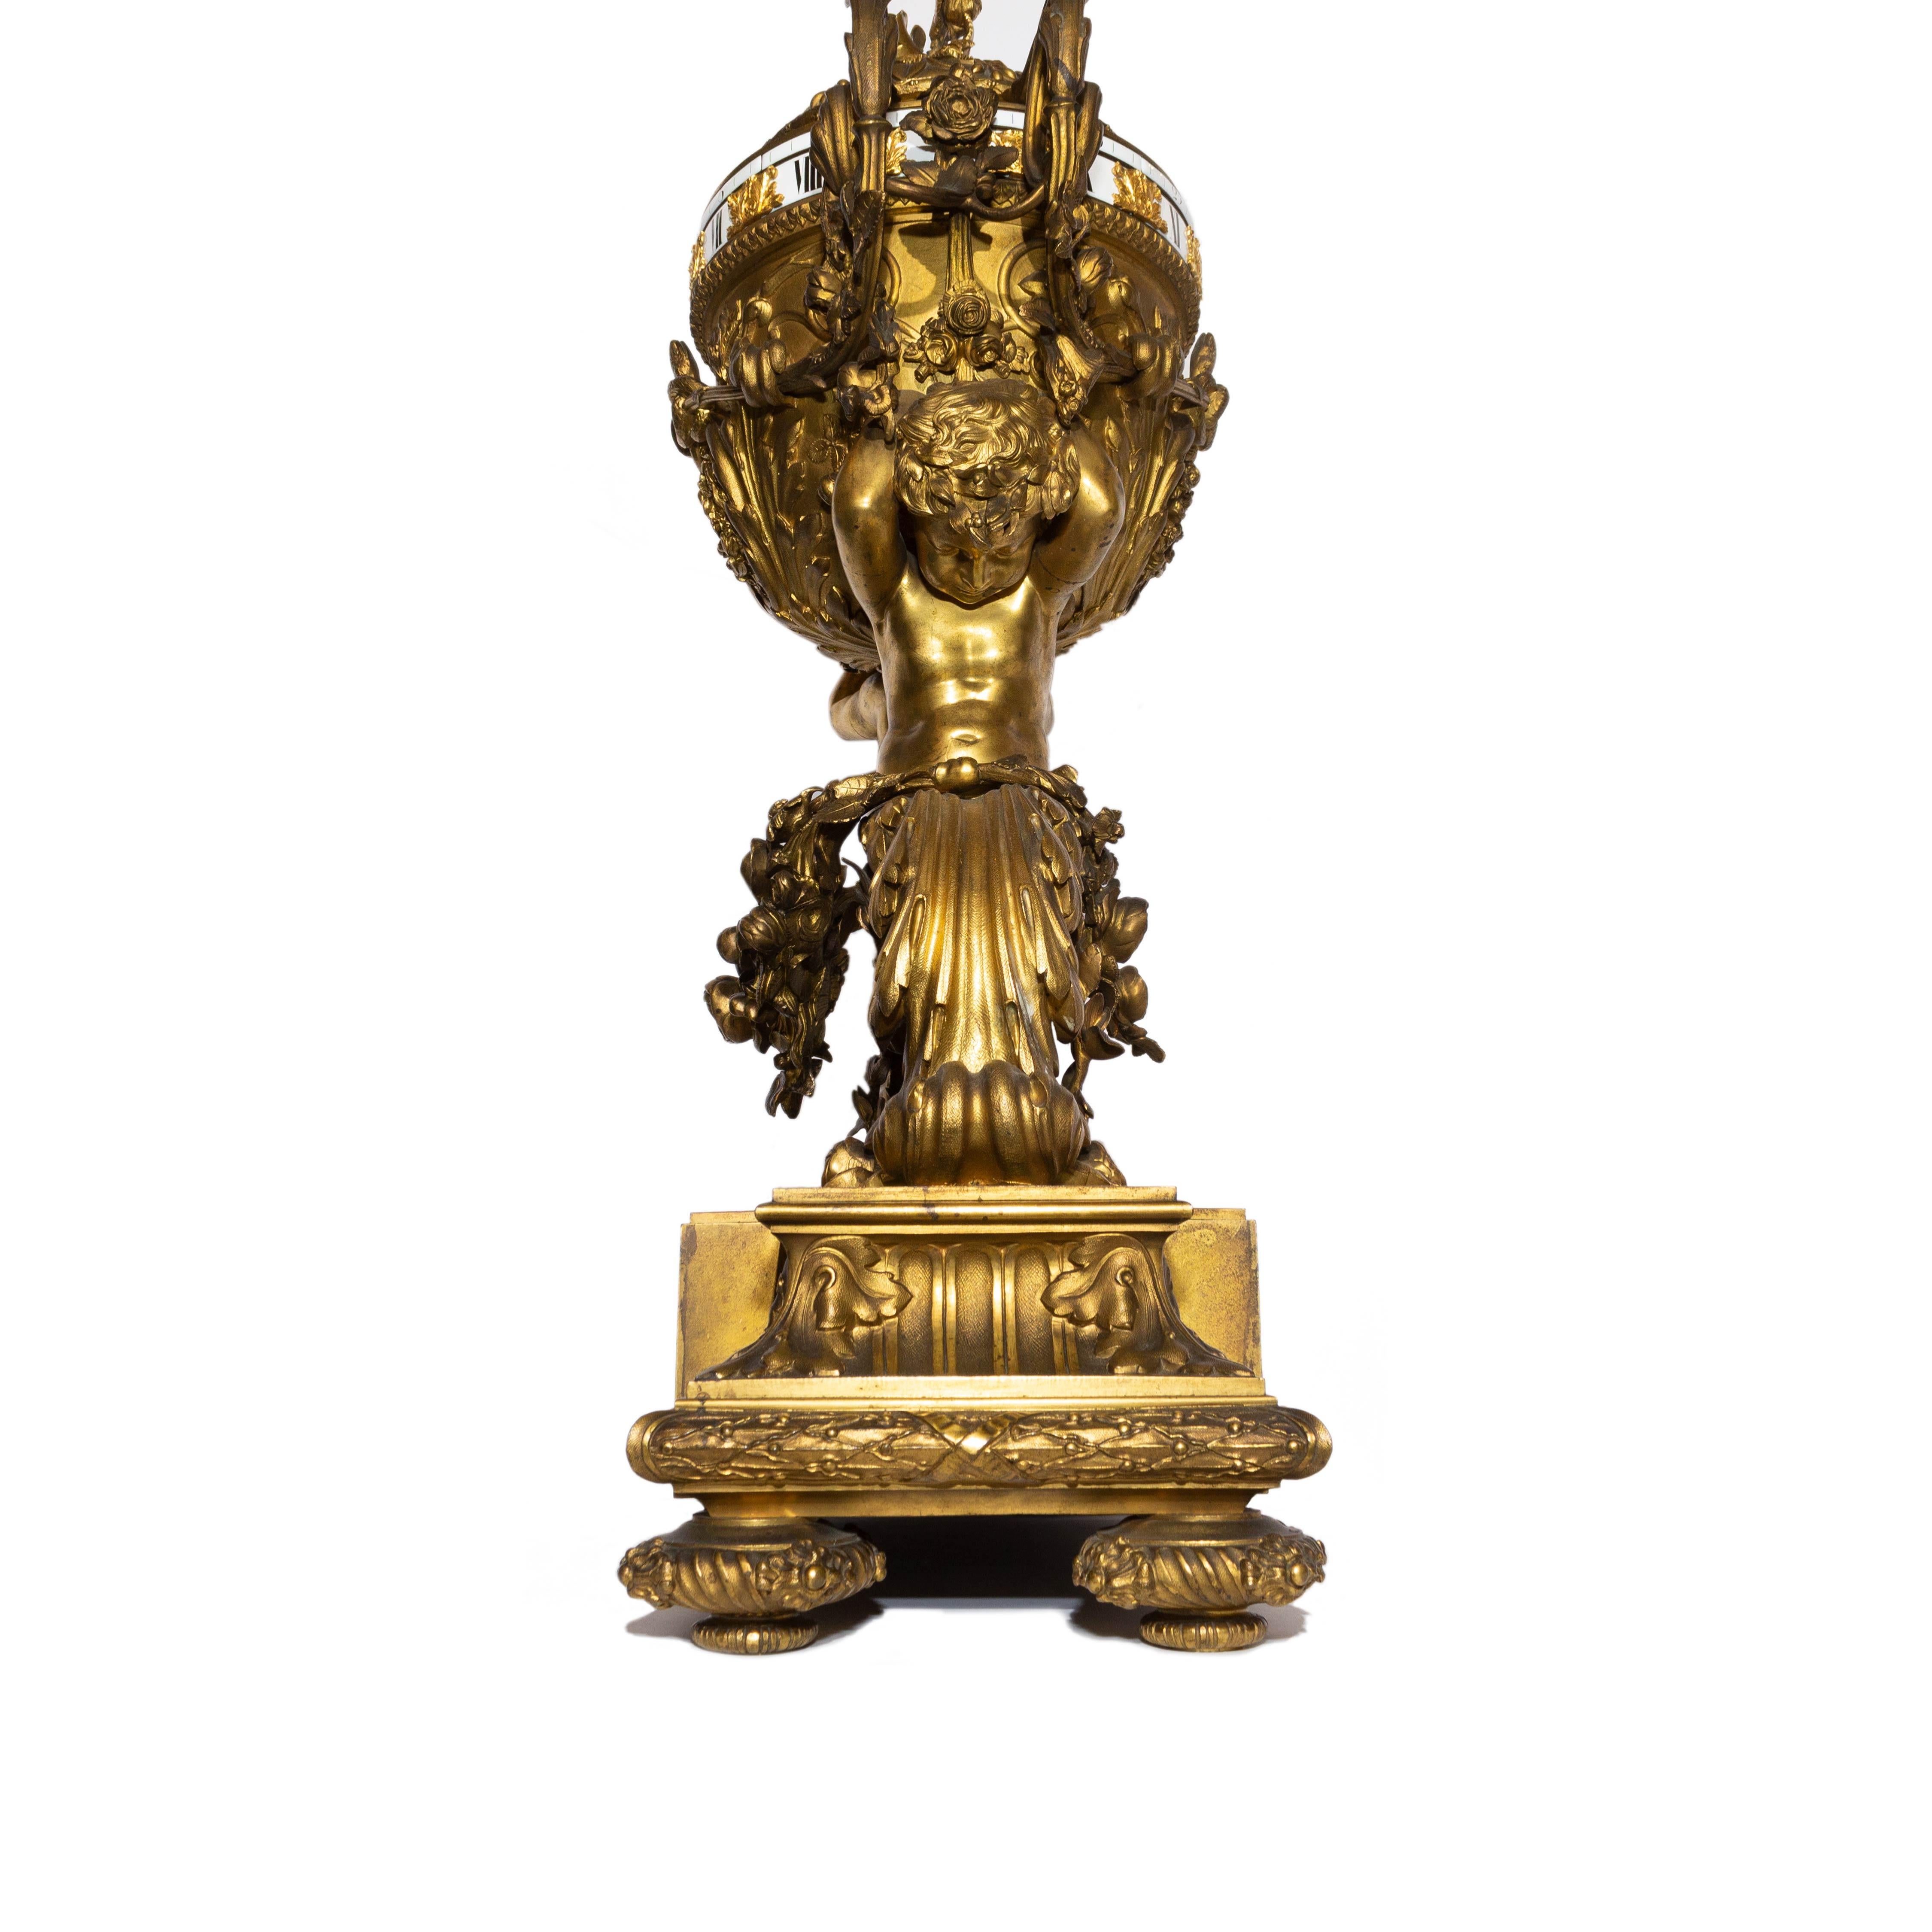 A Large Napoleon III ormolu Pendule À Cercles Tournants
Attributed to Deniere, after the model by Jean-François Forty, Paris, third quarter 19th century
Modeled as lidded vase, raised on the shoulders of two putto terms, on a shaped rectangular